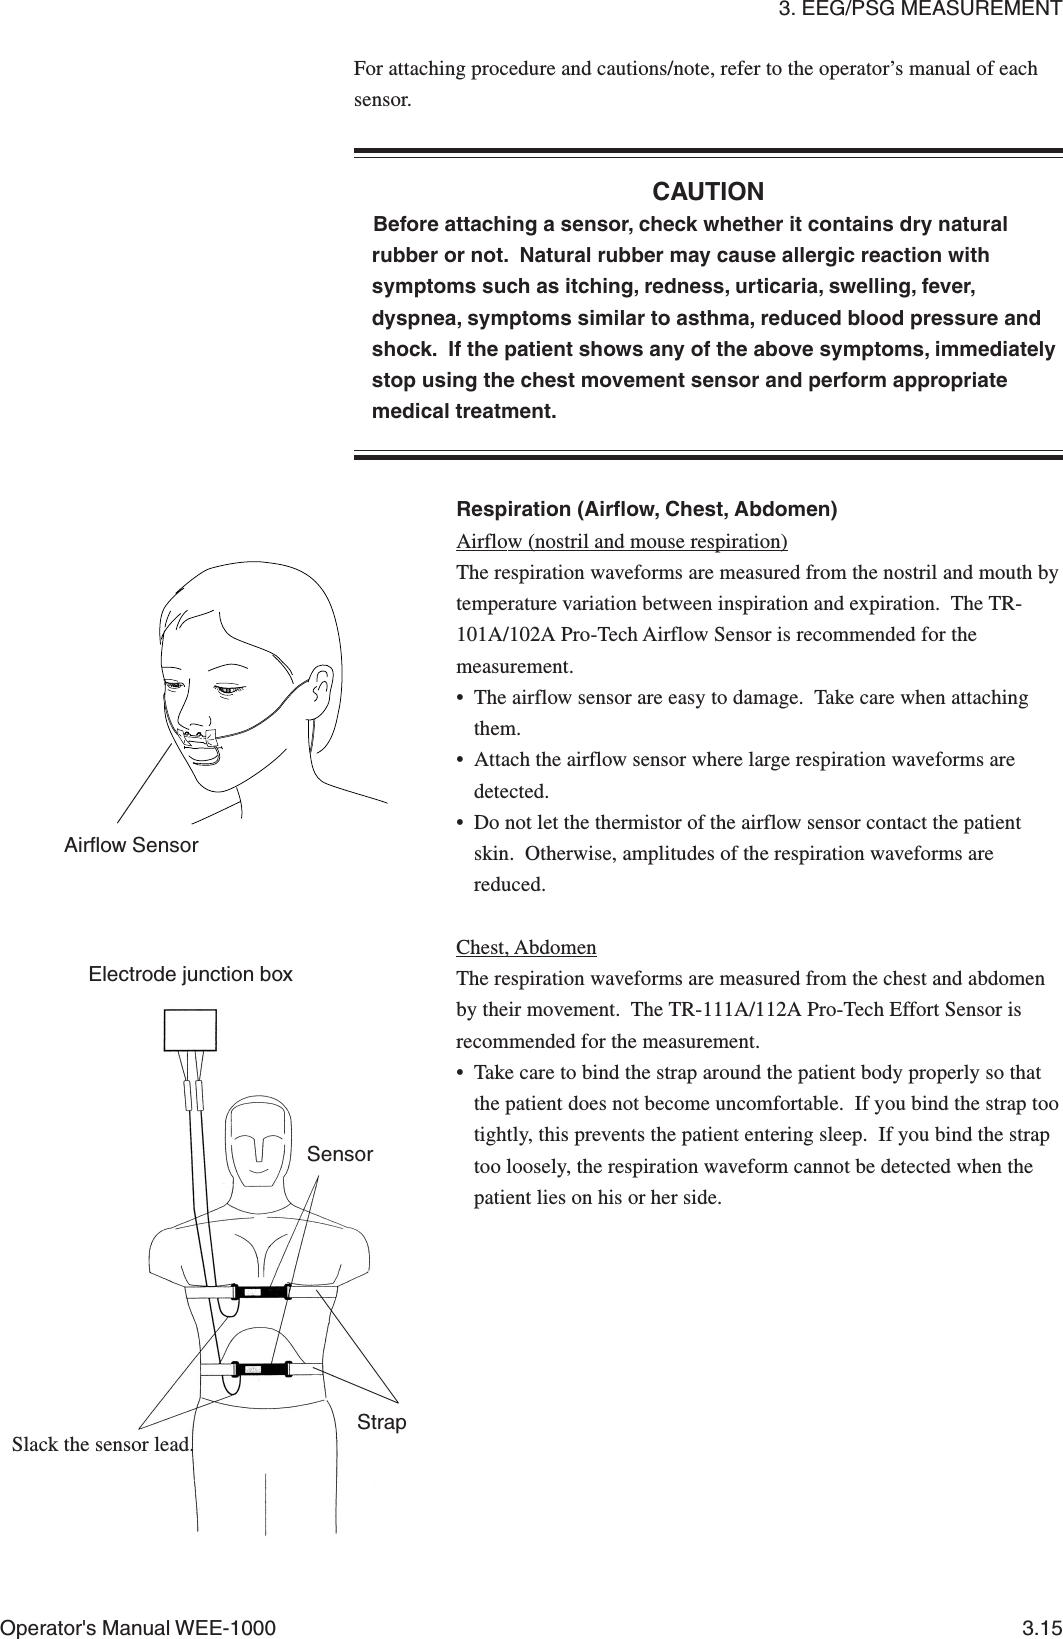 3. EEG/PSG MEASUREMENTOperator&apos;s Manual WEE-1000 3.15For attaching procedure and cautions/note, refer to the operator’s manual of eachsensor.CAUTIONBefore attaching a sensor, check whether it contains dry naturalrubber or not.  Natural rubber may cause allergic reaction withsymptoms such as itching, redness, urticaria, swelling, fever,dyspnea, symptoms similar to asthma, reduced blood pressure andshock.  If the patient shows any of the above symptoms, immediatelystop using the chest movement sensor and perform appropriatemedical treatment.Airflow SensorRespiration (Airflow, Chest, Abdomen)Airflow (nostril and mouse respiration)The respiration waveforms are measured from the nostril and mouth bytemperature variation between inspiration and expiration.  The TR-101A/102A Pro-Tech Airflow Sensor is recommended for themeasurement.• The airflow sensor are easy to damage.  Take care when attachingthem.• Attach the airflow sensor where large respiration waveforms aredetected.• Do not let the thermistor of the airflow sensor contact the patientskin.  Otherwise, amplitudes of the respiration waveforms arereduced.Chest, AbdomenThe respiration waveforms are measured from the chest and abdomenby their movement.  The TR-111A/112A Pro-Tech Effort Sensor isrecommended for the measurement.• Take care to bind the strap around the patient body properly so thatthe patient does not become uncomfortable.  If you bind the strap tootightly, this prevents the patient entering sleep.  If you bind the straptoo loosely, the respiration waveform cannot be detected when thepatient lies on his or her side.SensorSlack the sensor lead.Electrode junction boxStrap